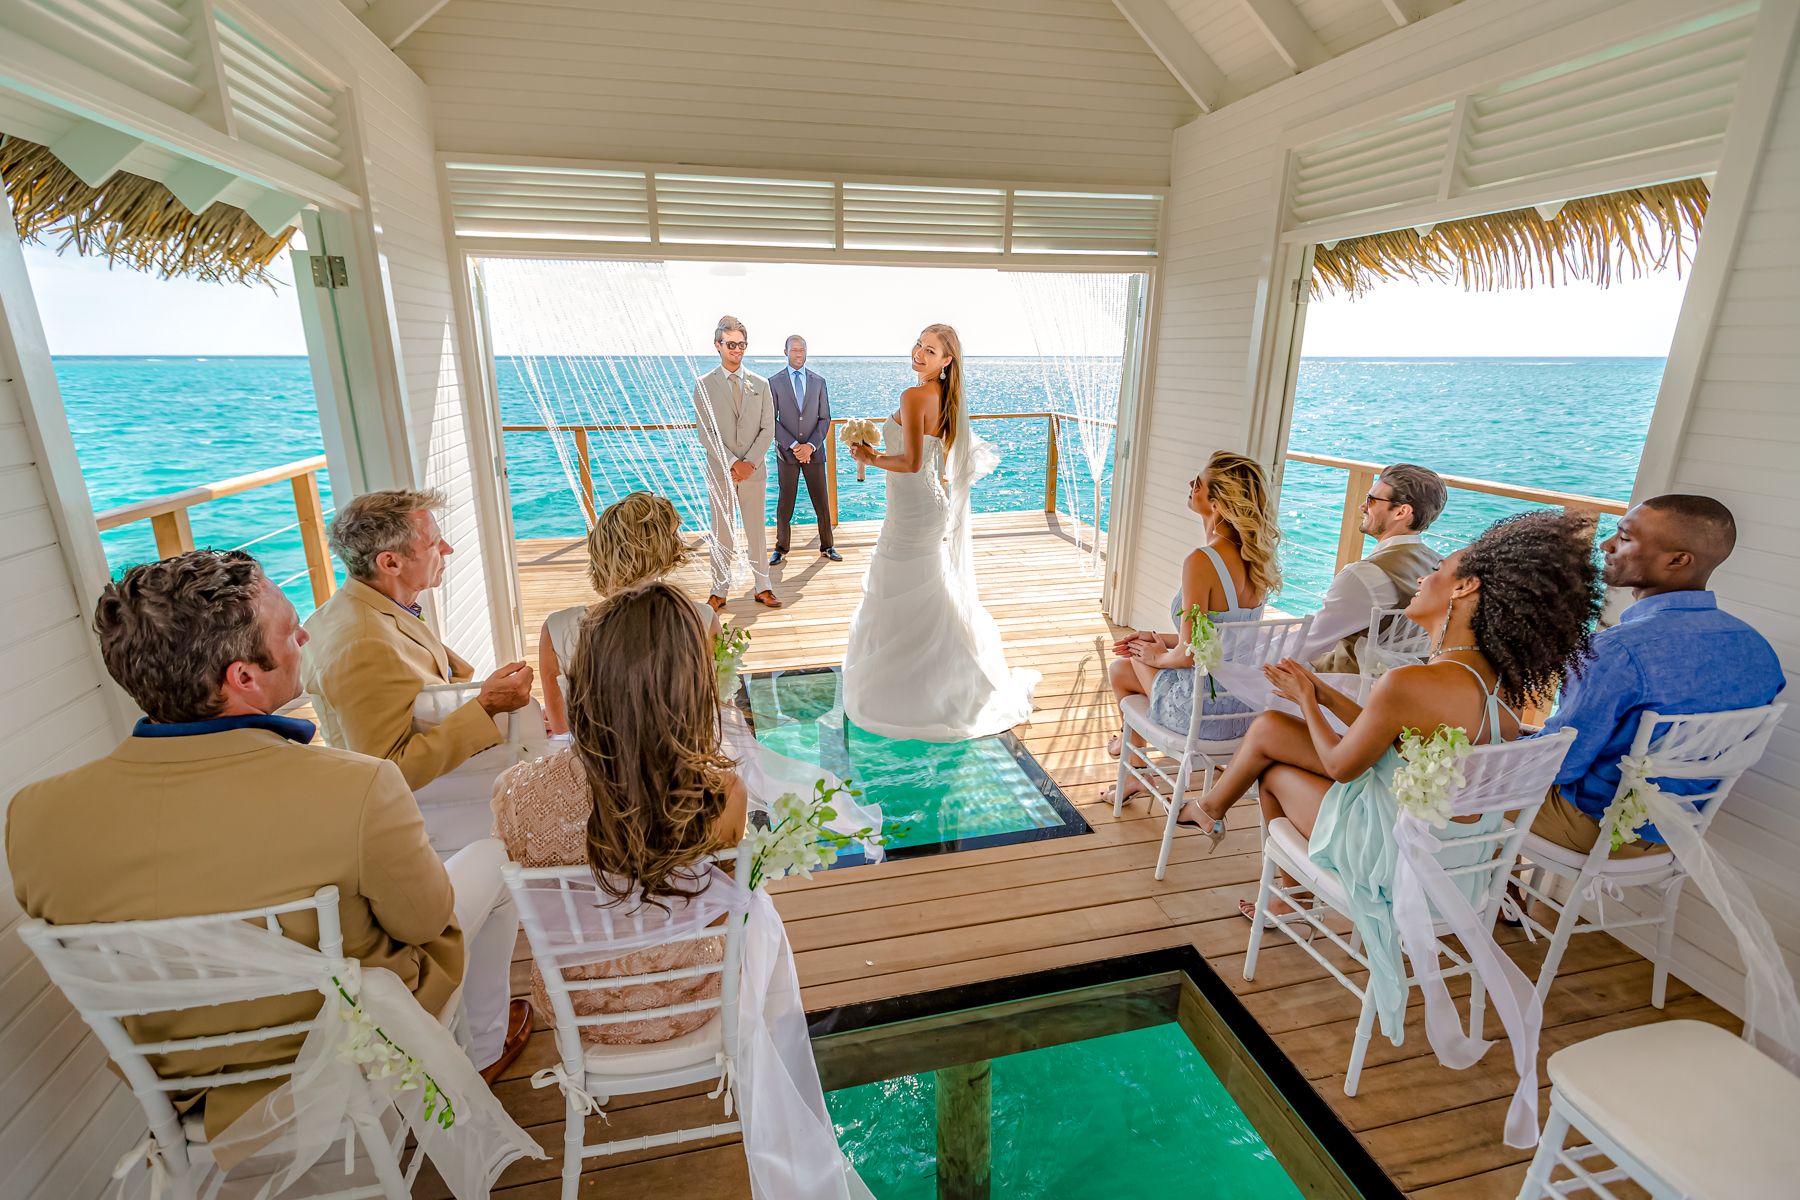 A Wedding Day That Quite Literally “Walks on Water”